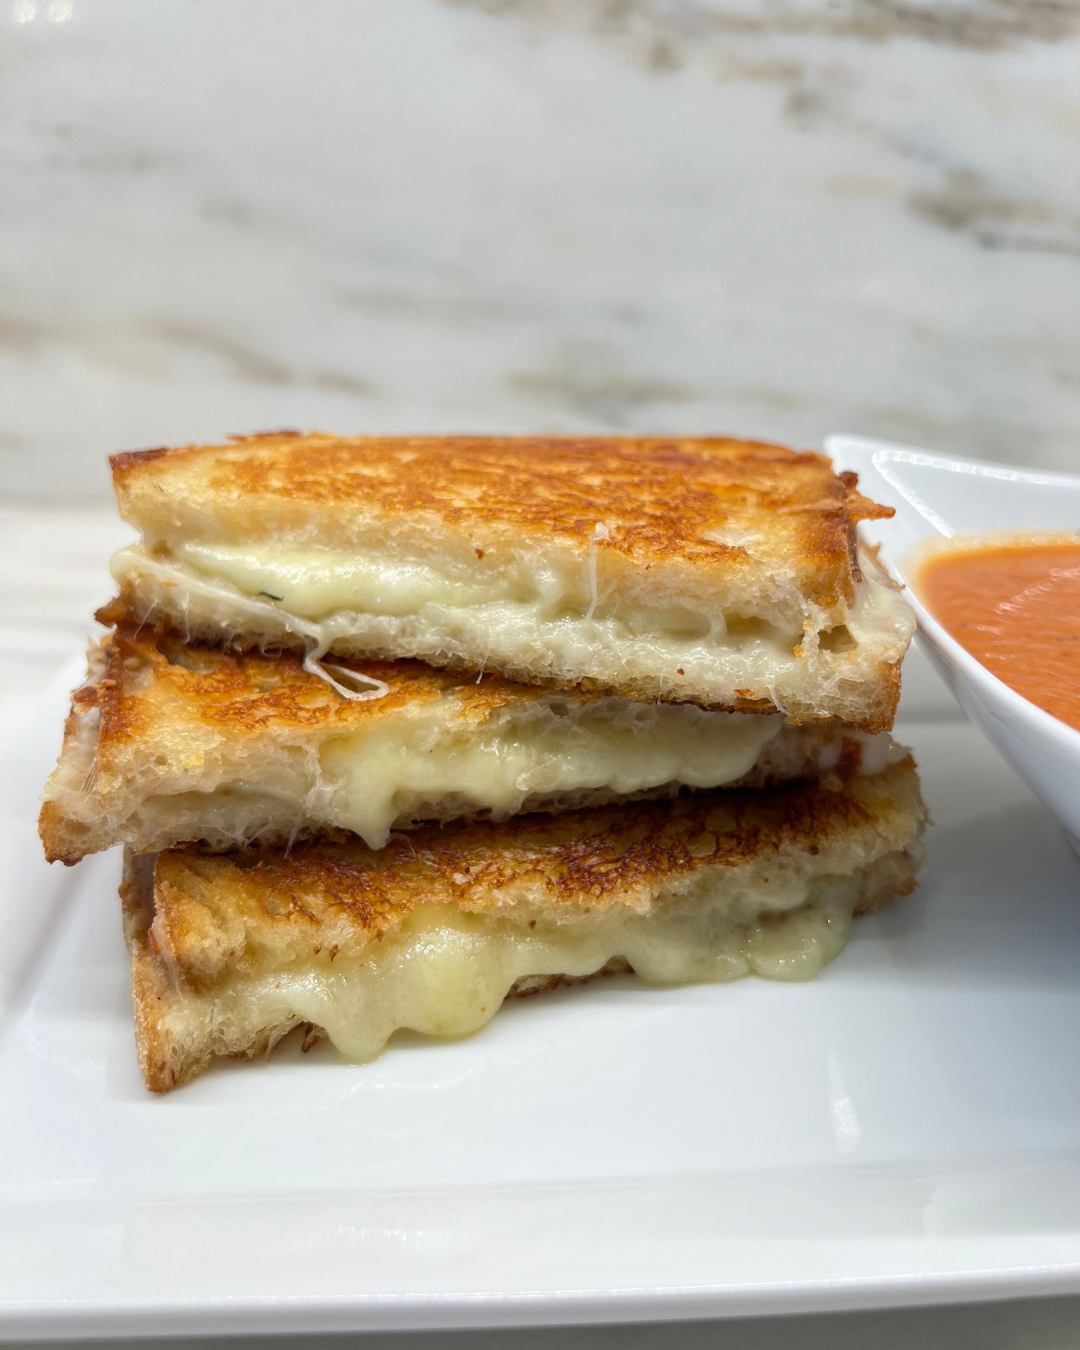 Tomato and Basil Soup with Grilled Cheese

recipe, recipe blog, appetizer, soup recipe, tomato soup, basil soup, grilled cheese, recipe tasting, hosting